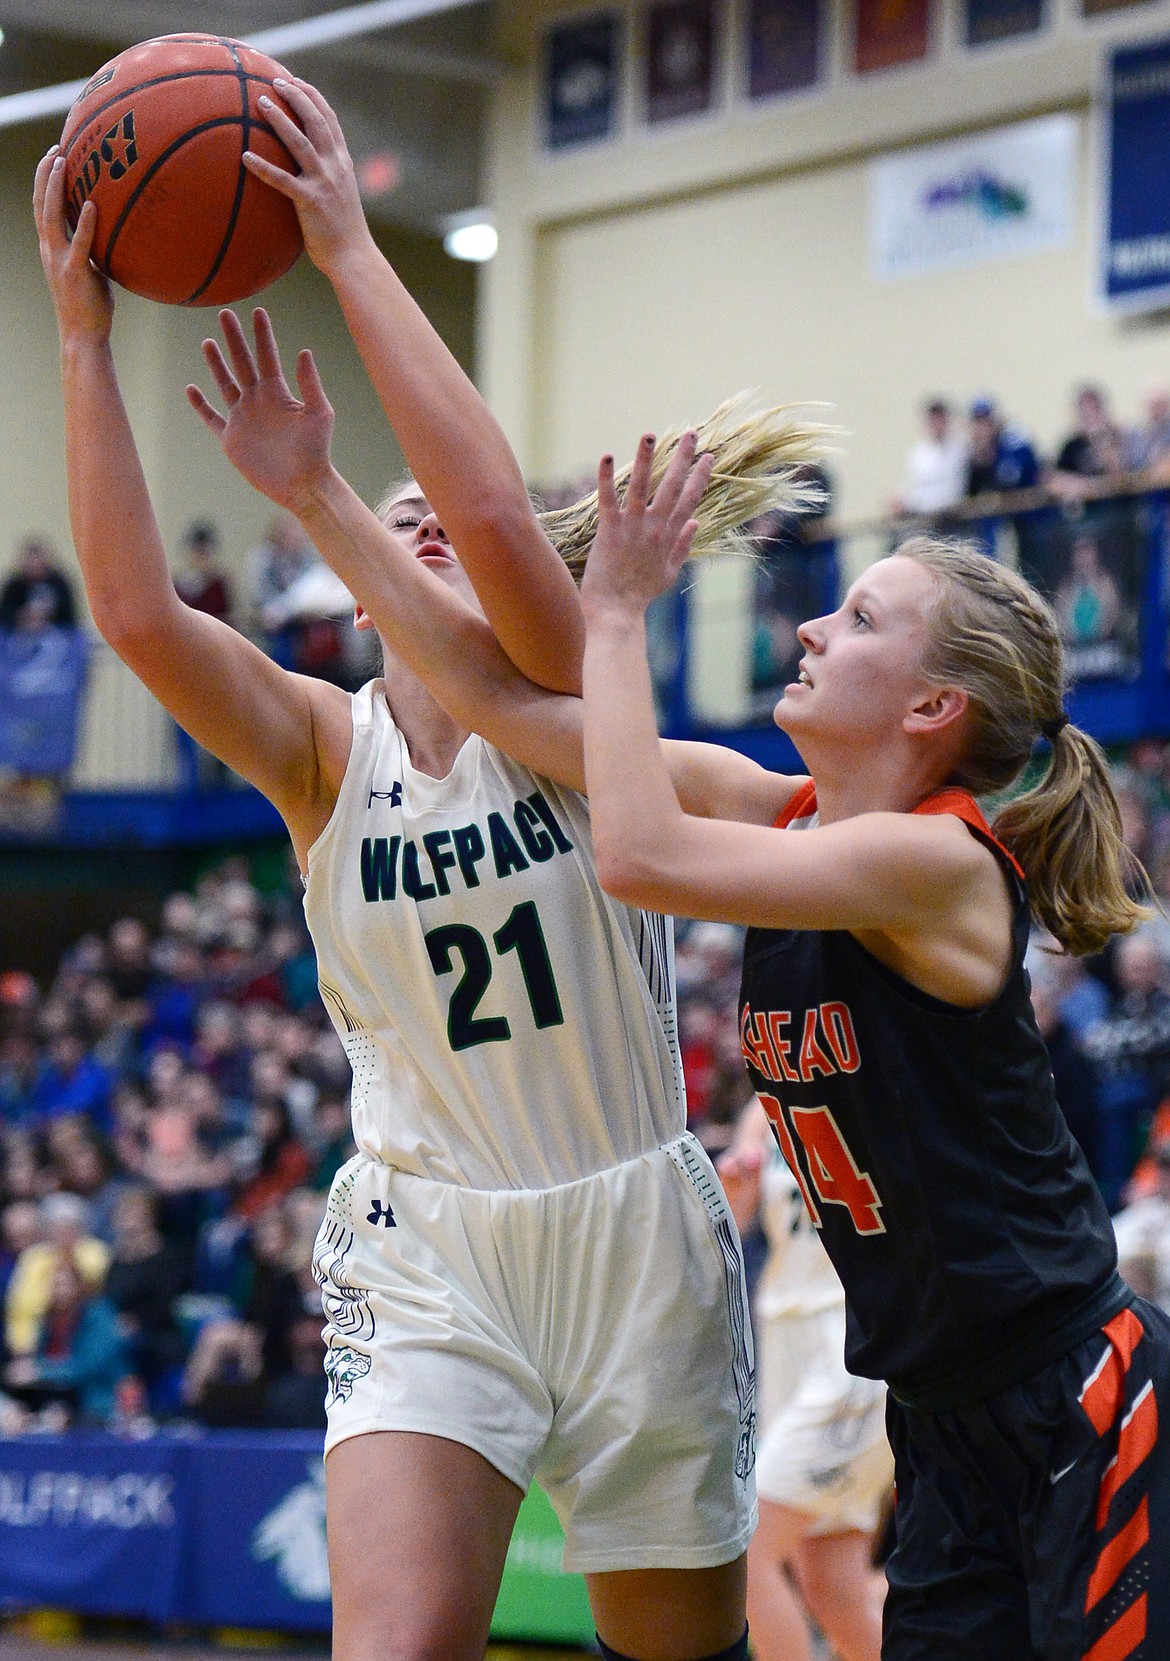 Glacier's Abi Manger (21) and Flathead's Jenna Johnson (14) battle for a rebound during a crosstown matchup at Glacier High School on Friday. (Casey Kreider/Daily Inter Lake)